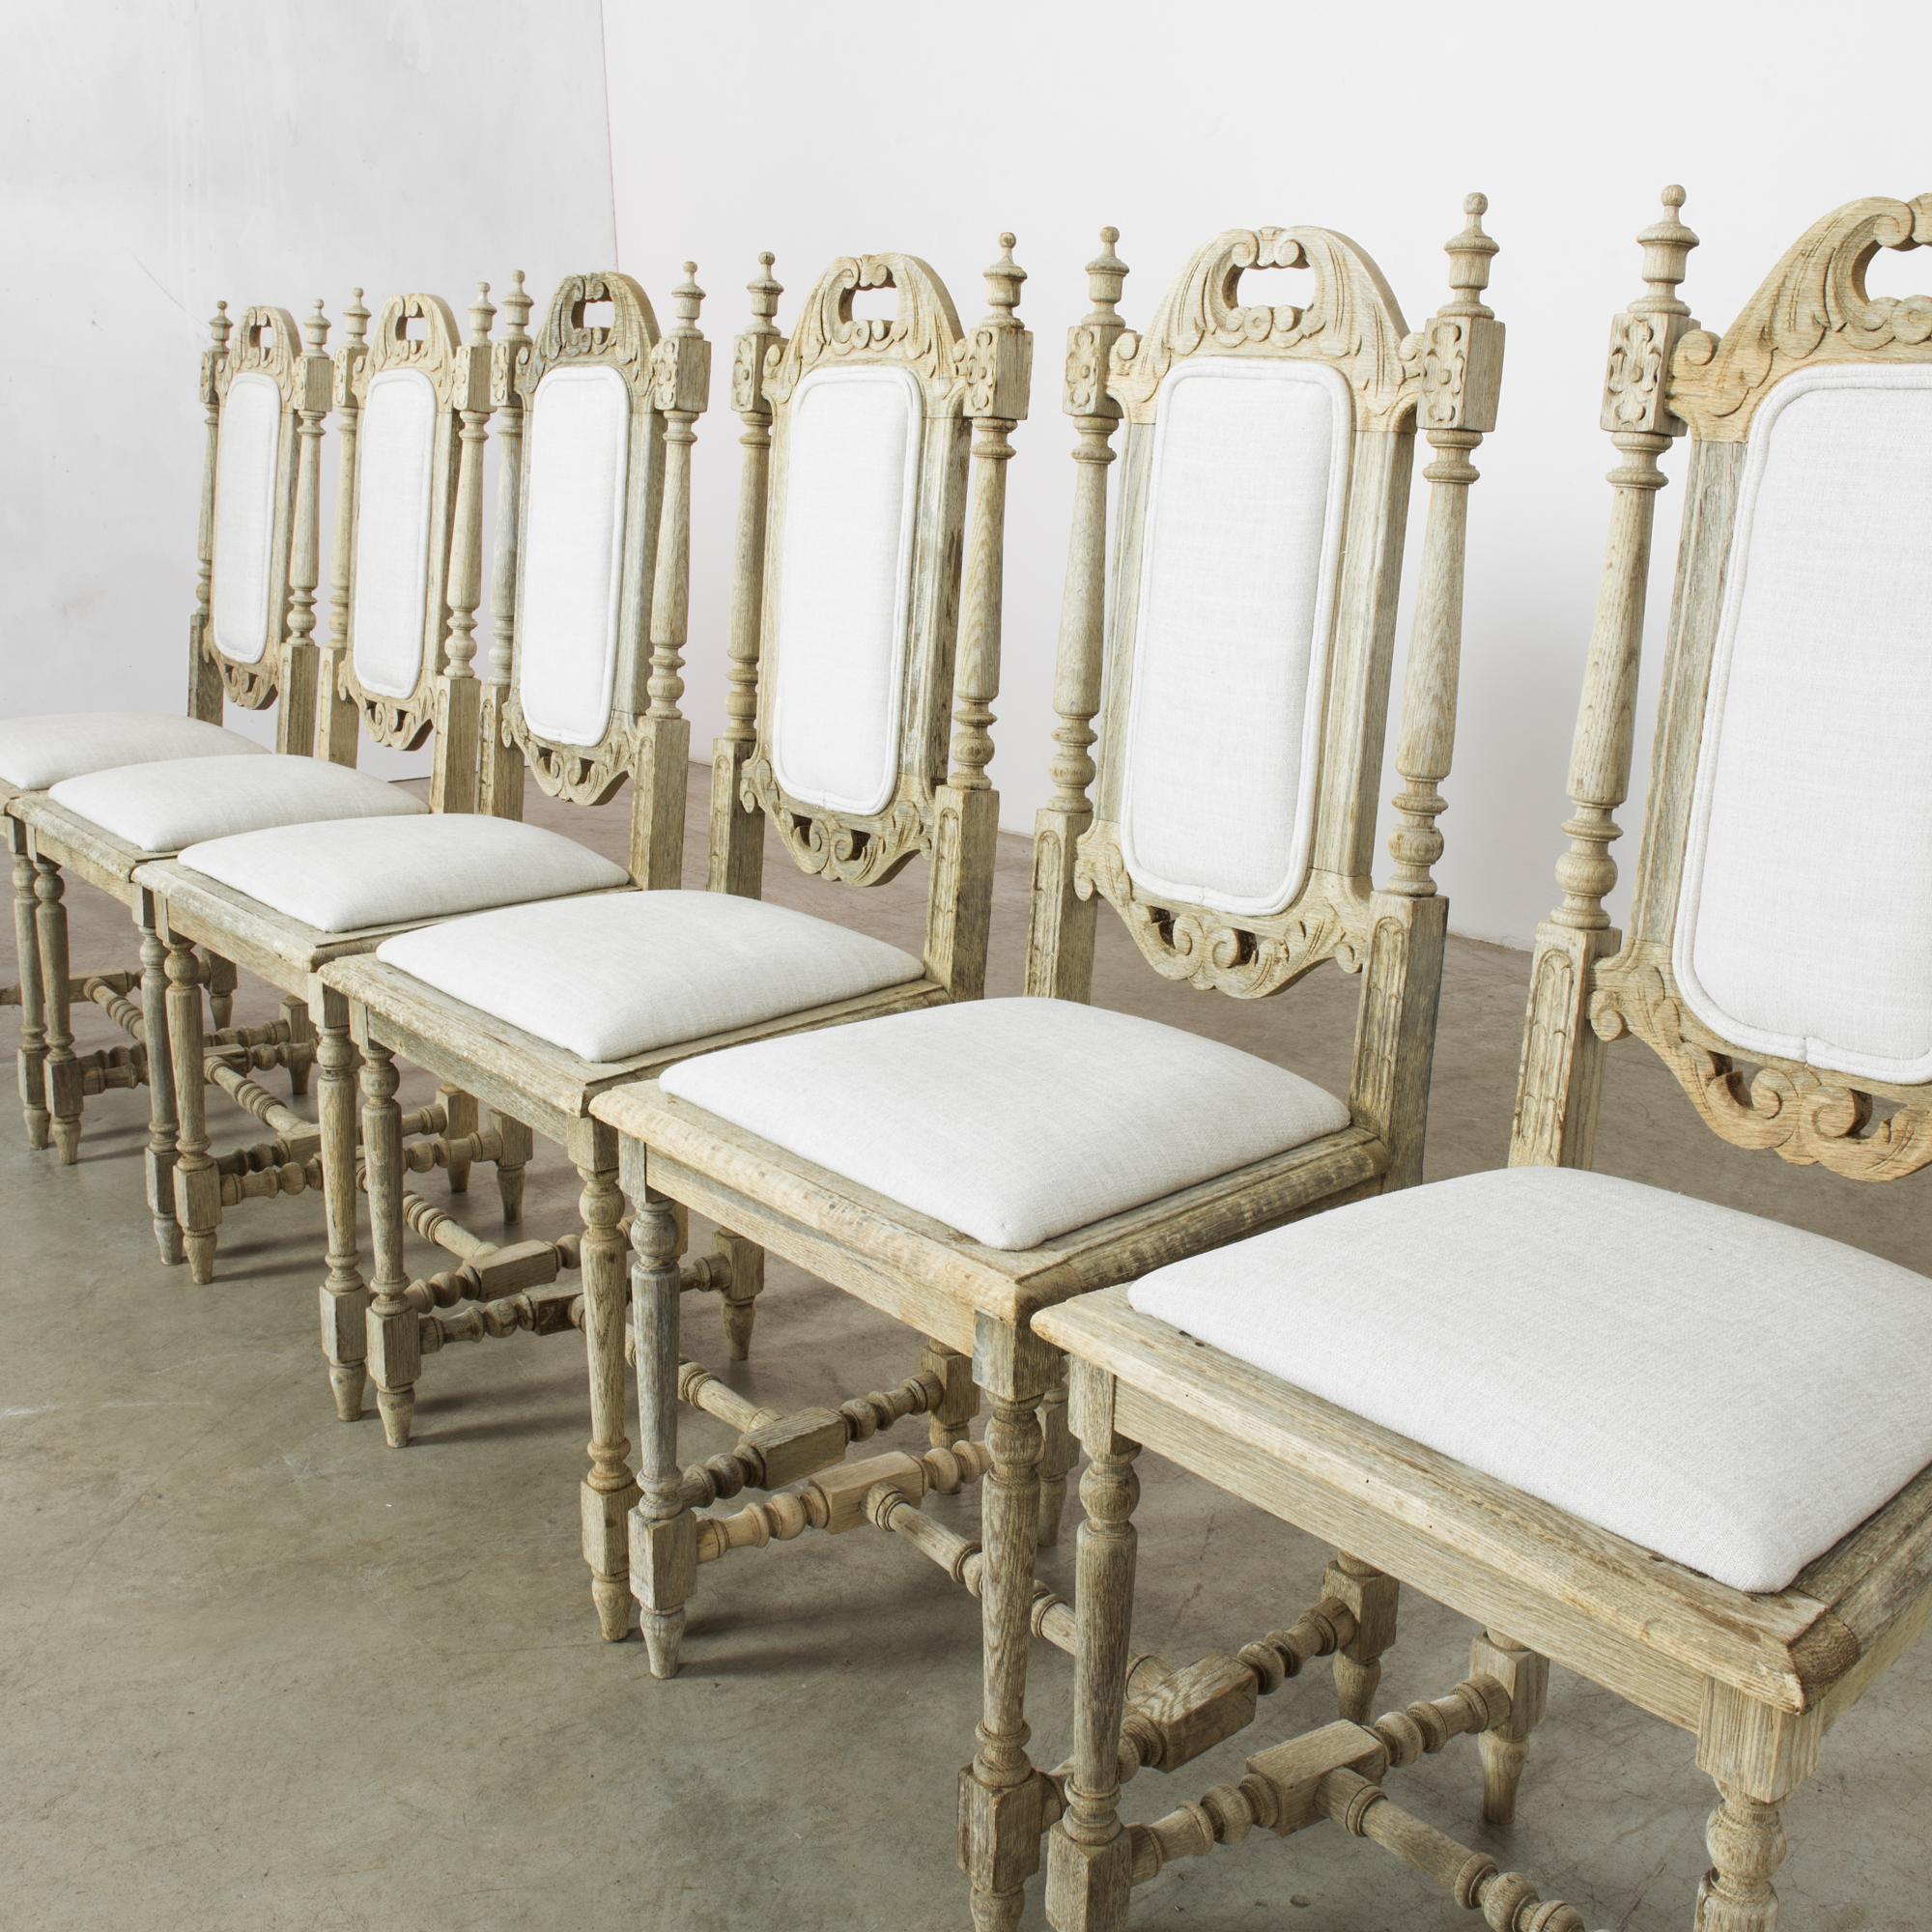 Hand-Carved 1950s Belgian Bleached Oak Chairs with Upholstered Seats and Backs, Set of Six For Sale